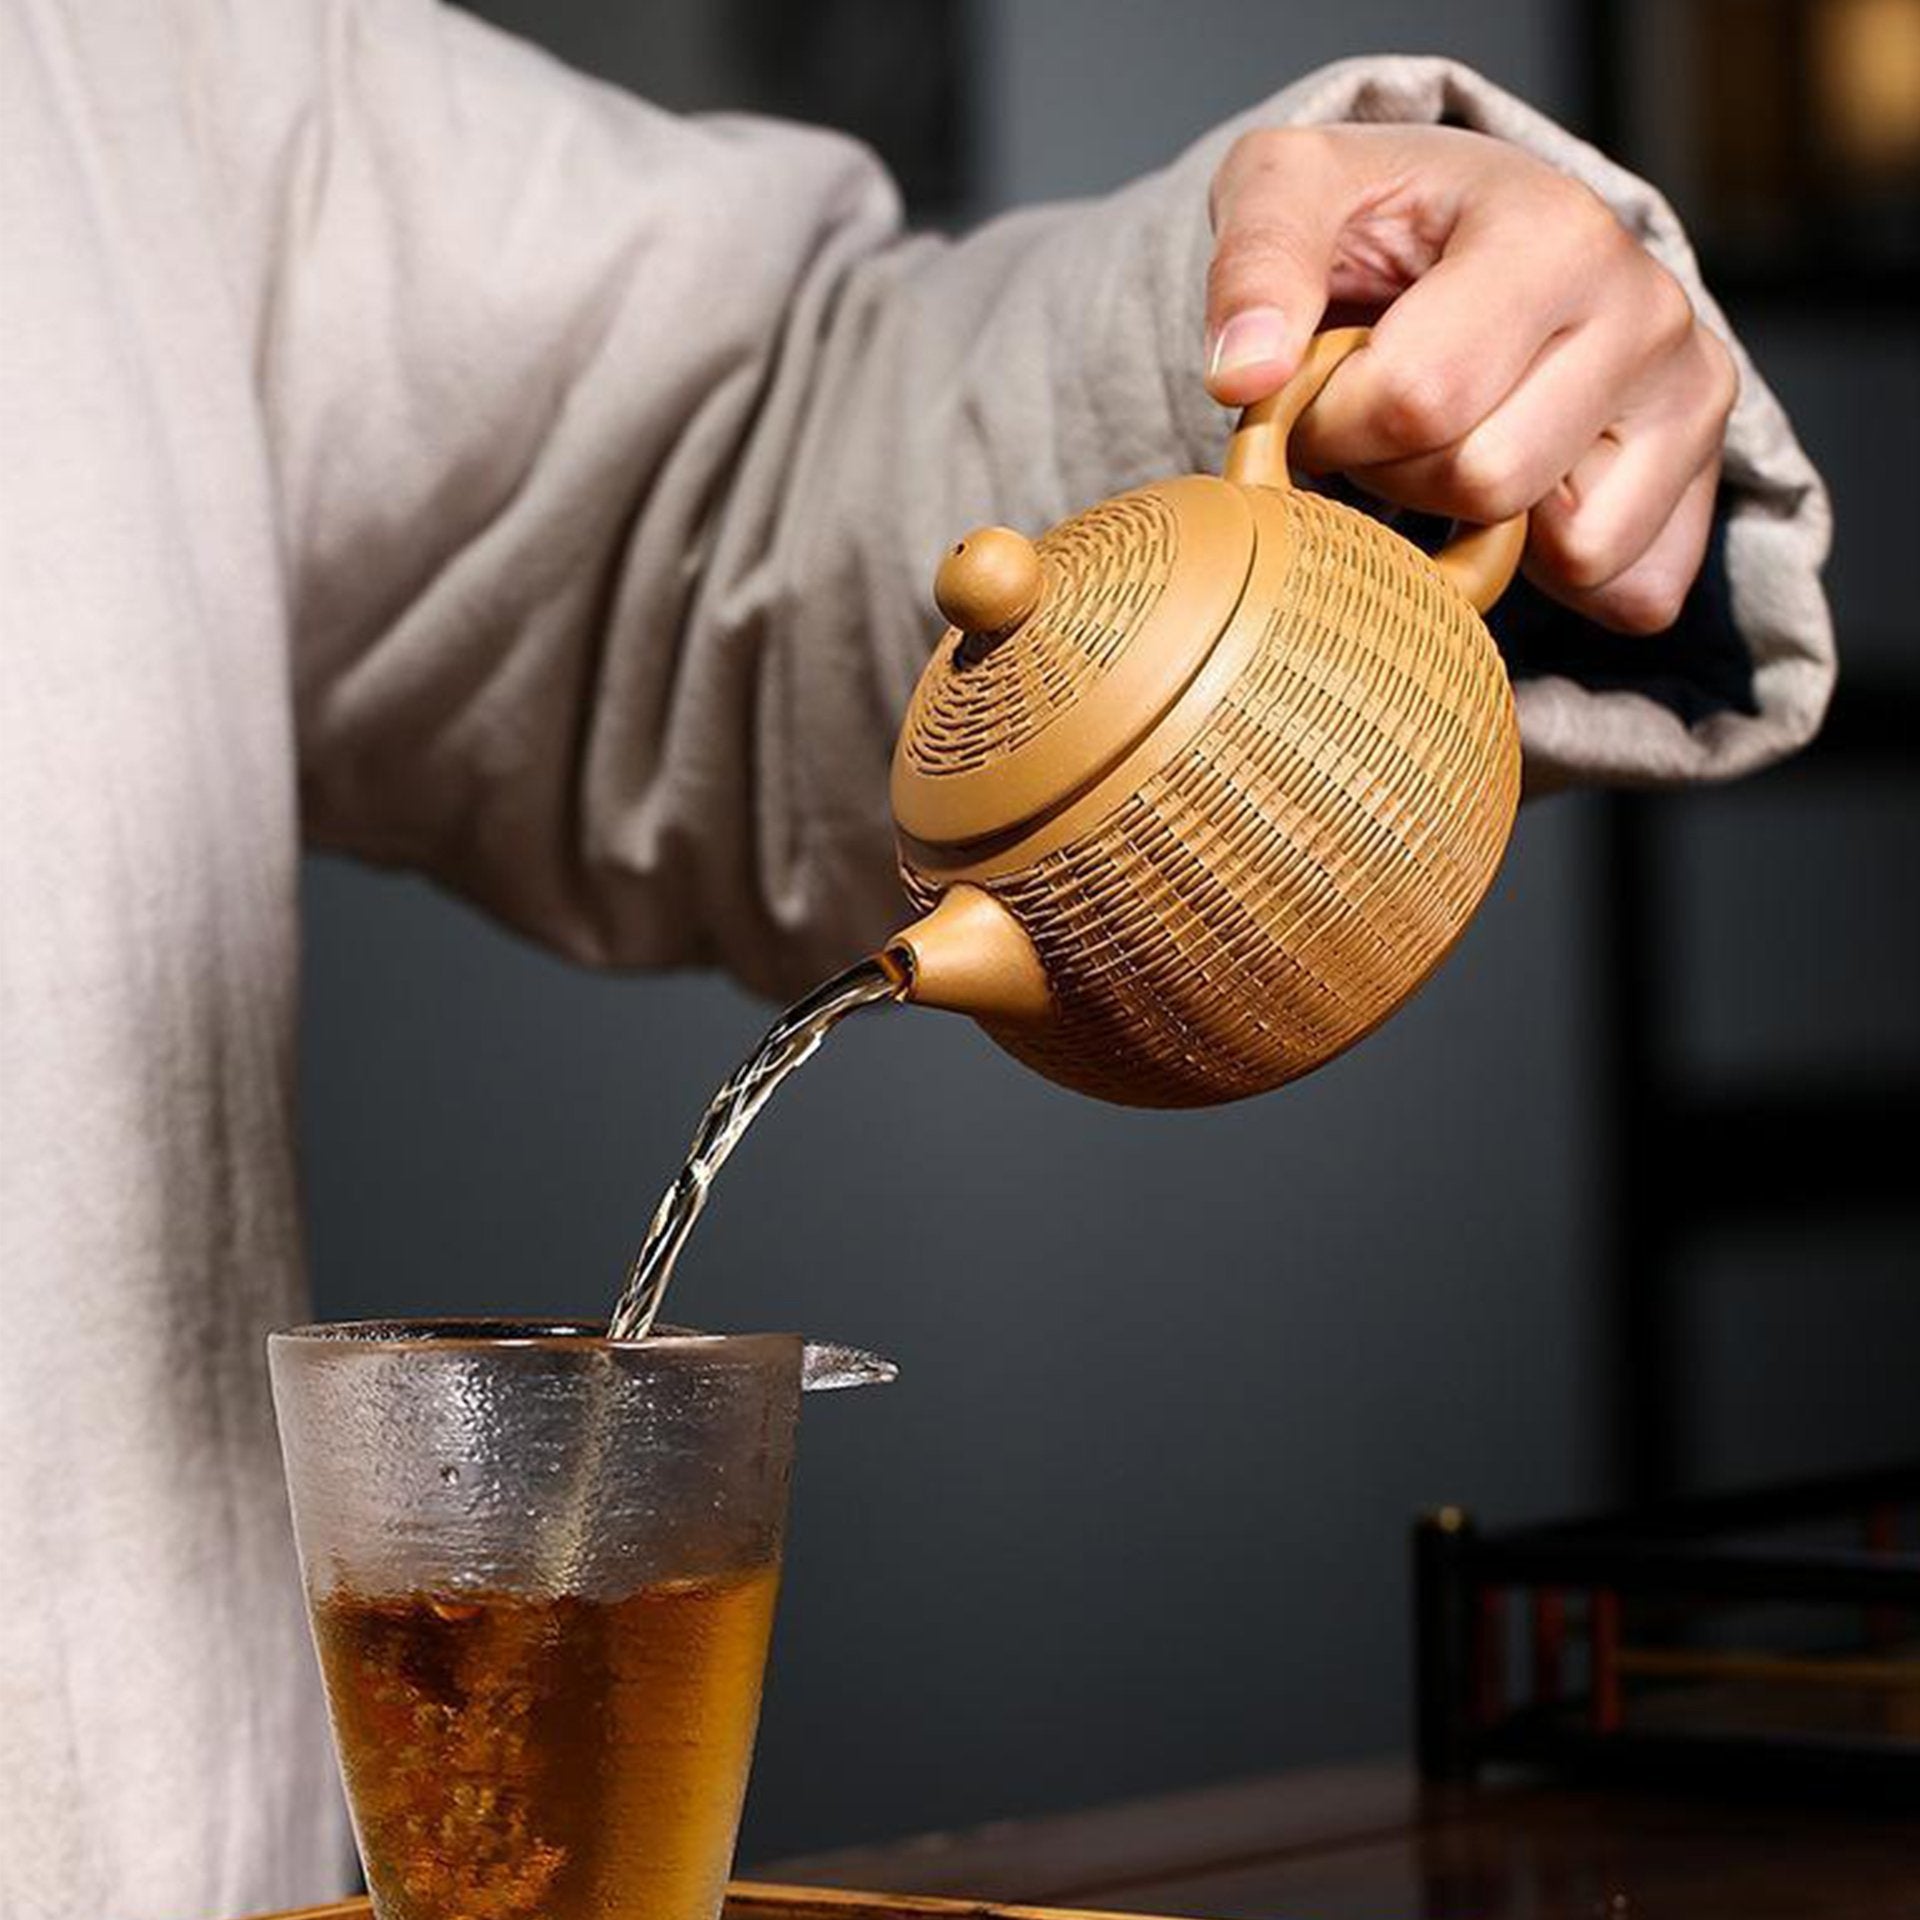 Hand pouring tea from a golden textured teapot into a glass.